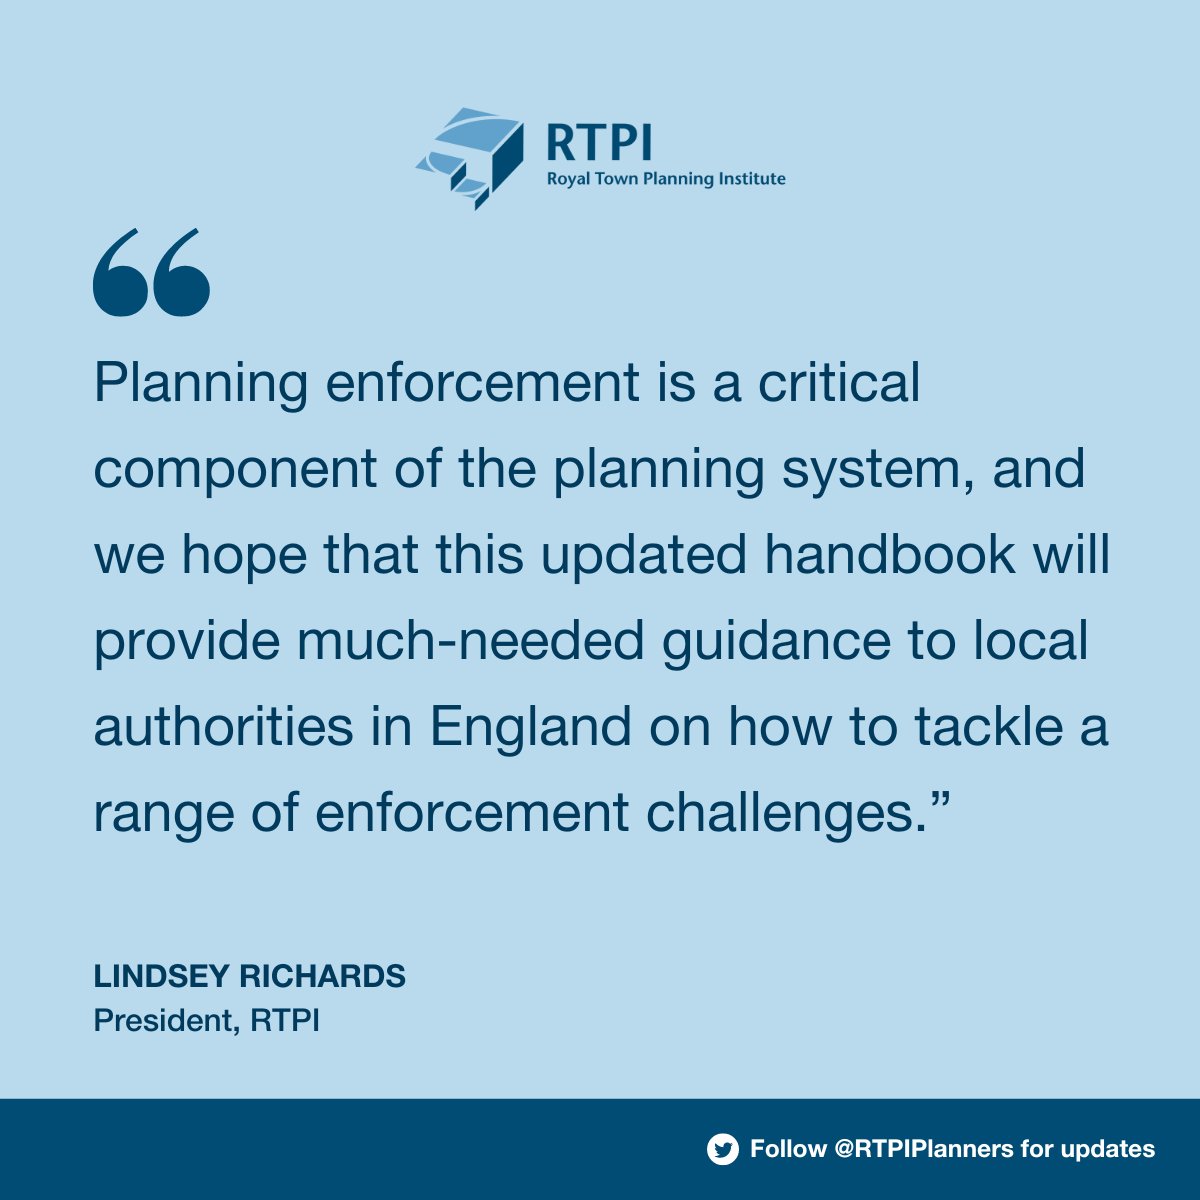 📣BREAKING NEWS: The new Planning Enforcement Handbook for England is out. The updated handbook provides local authorities’ enforcement teams with best practice advice on how to effectively deal with a range of enforcement challenges. View the handbook: rtpi.org.uk/practice-rtpi/…